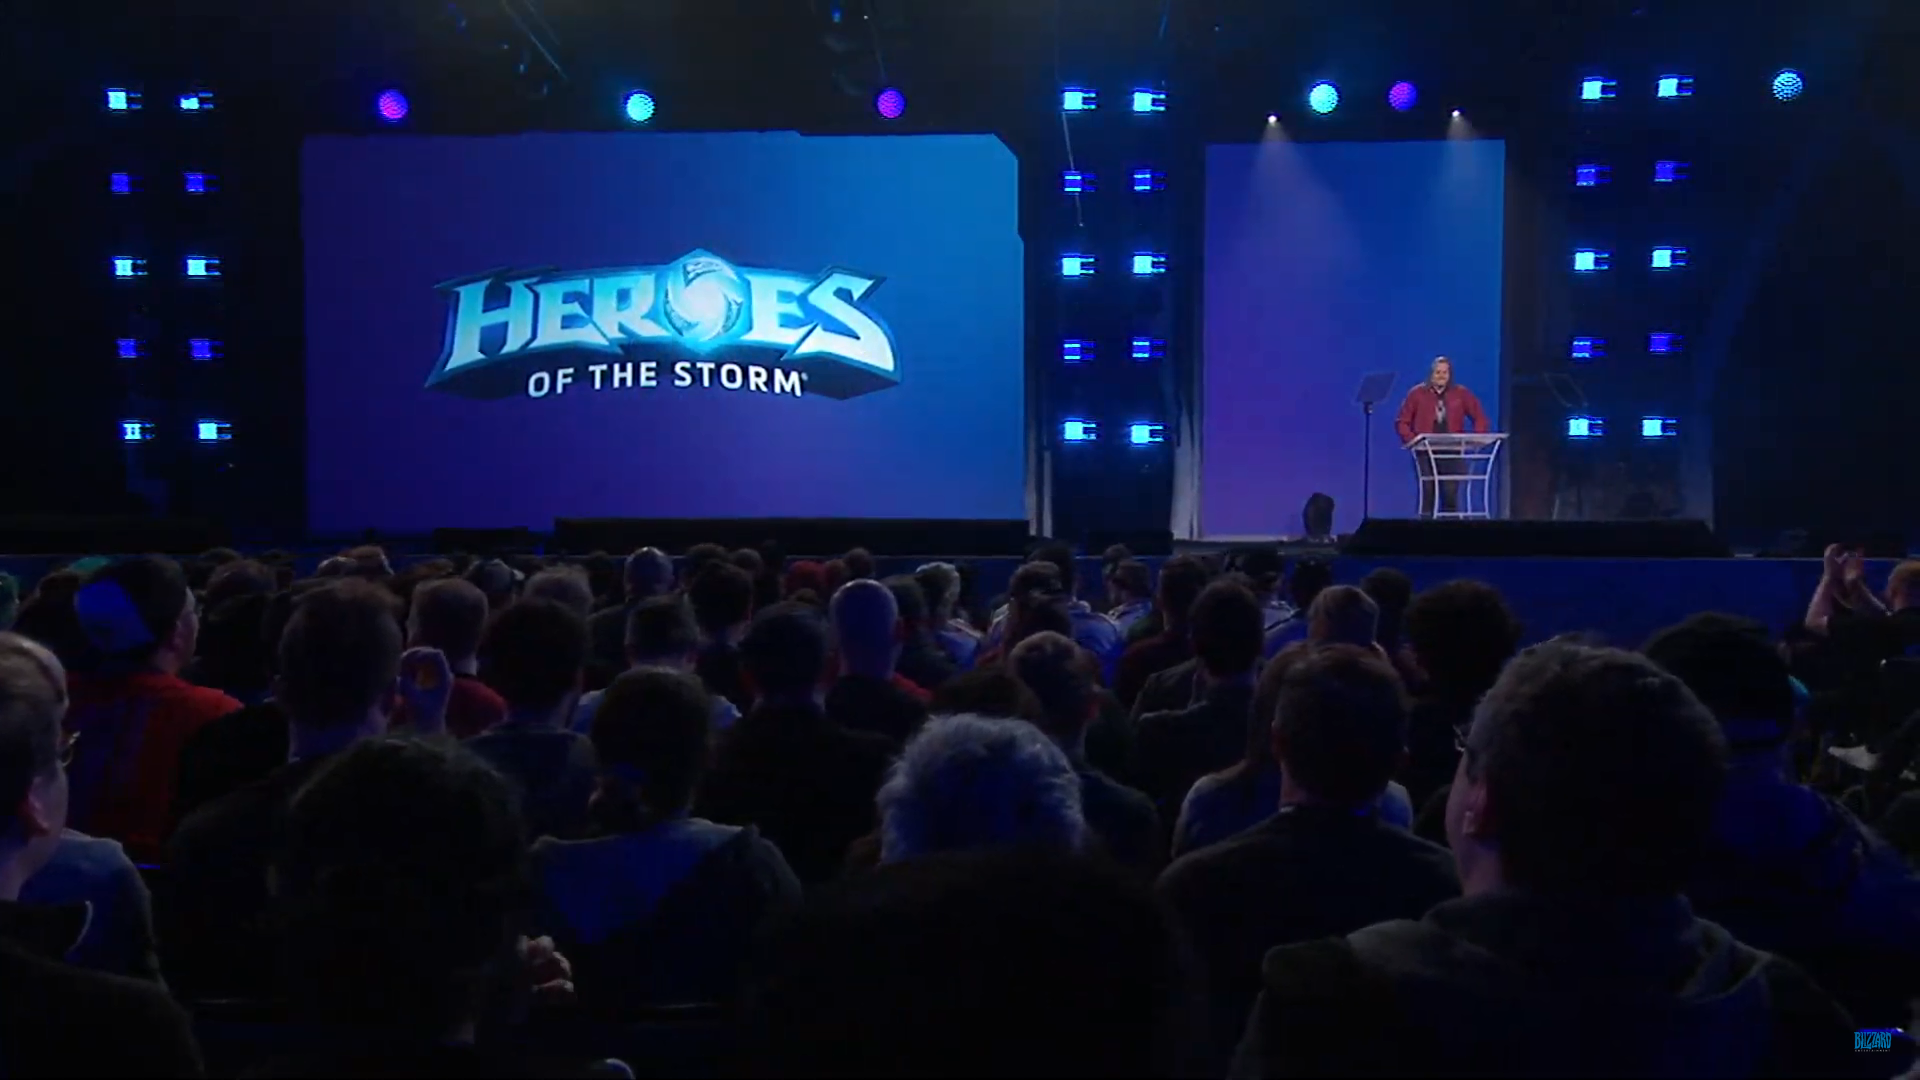 BlizzCon 2018 Heroes of the Storm: Hands on Demo with New Hero